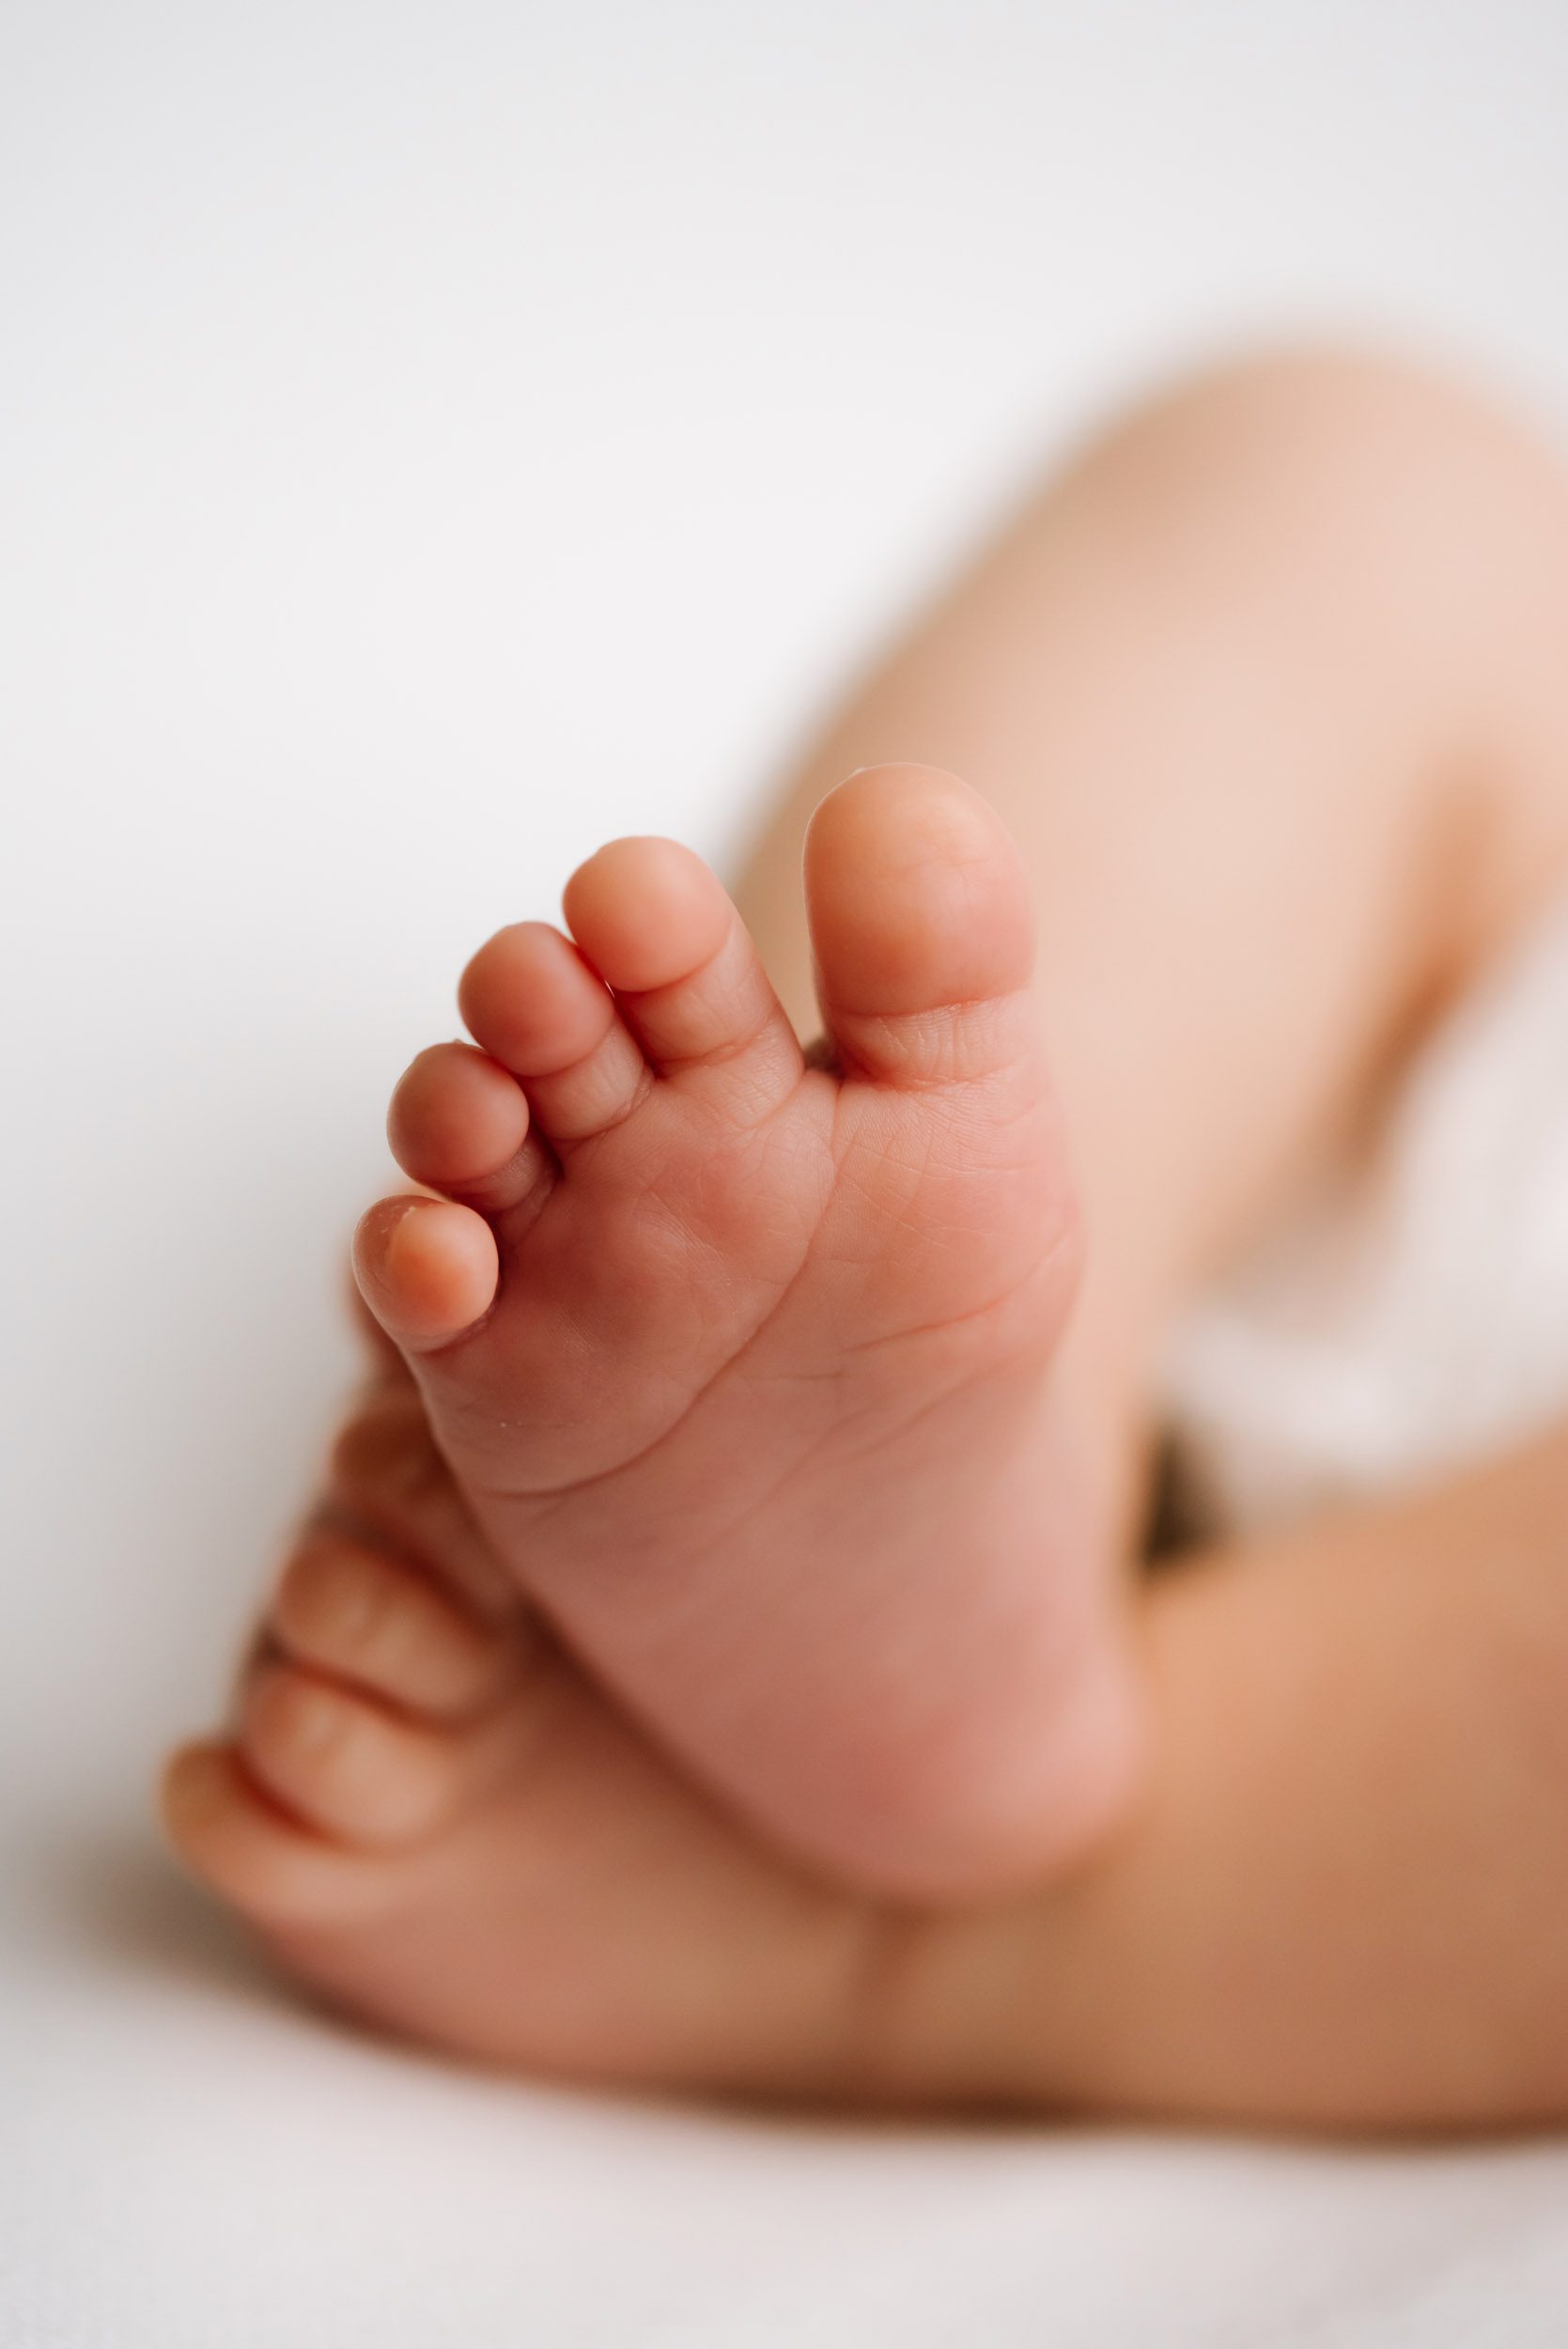 a close up macro picture of a baby's feet with her toes in sharp focus